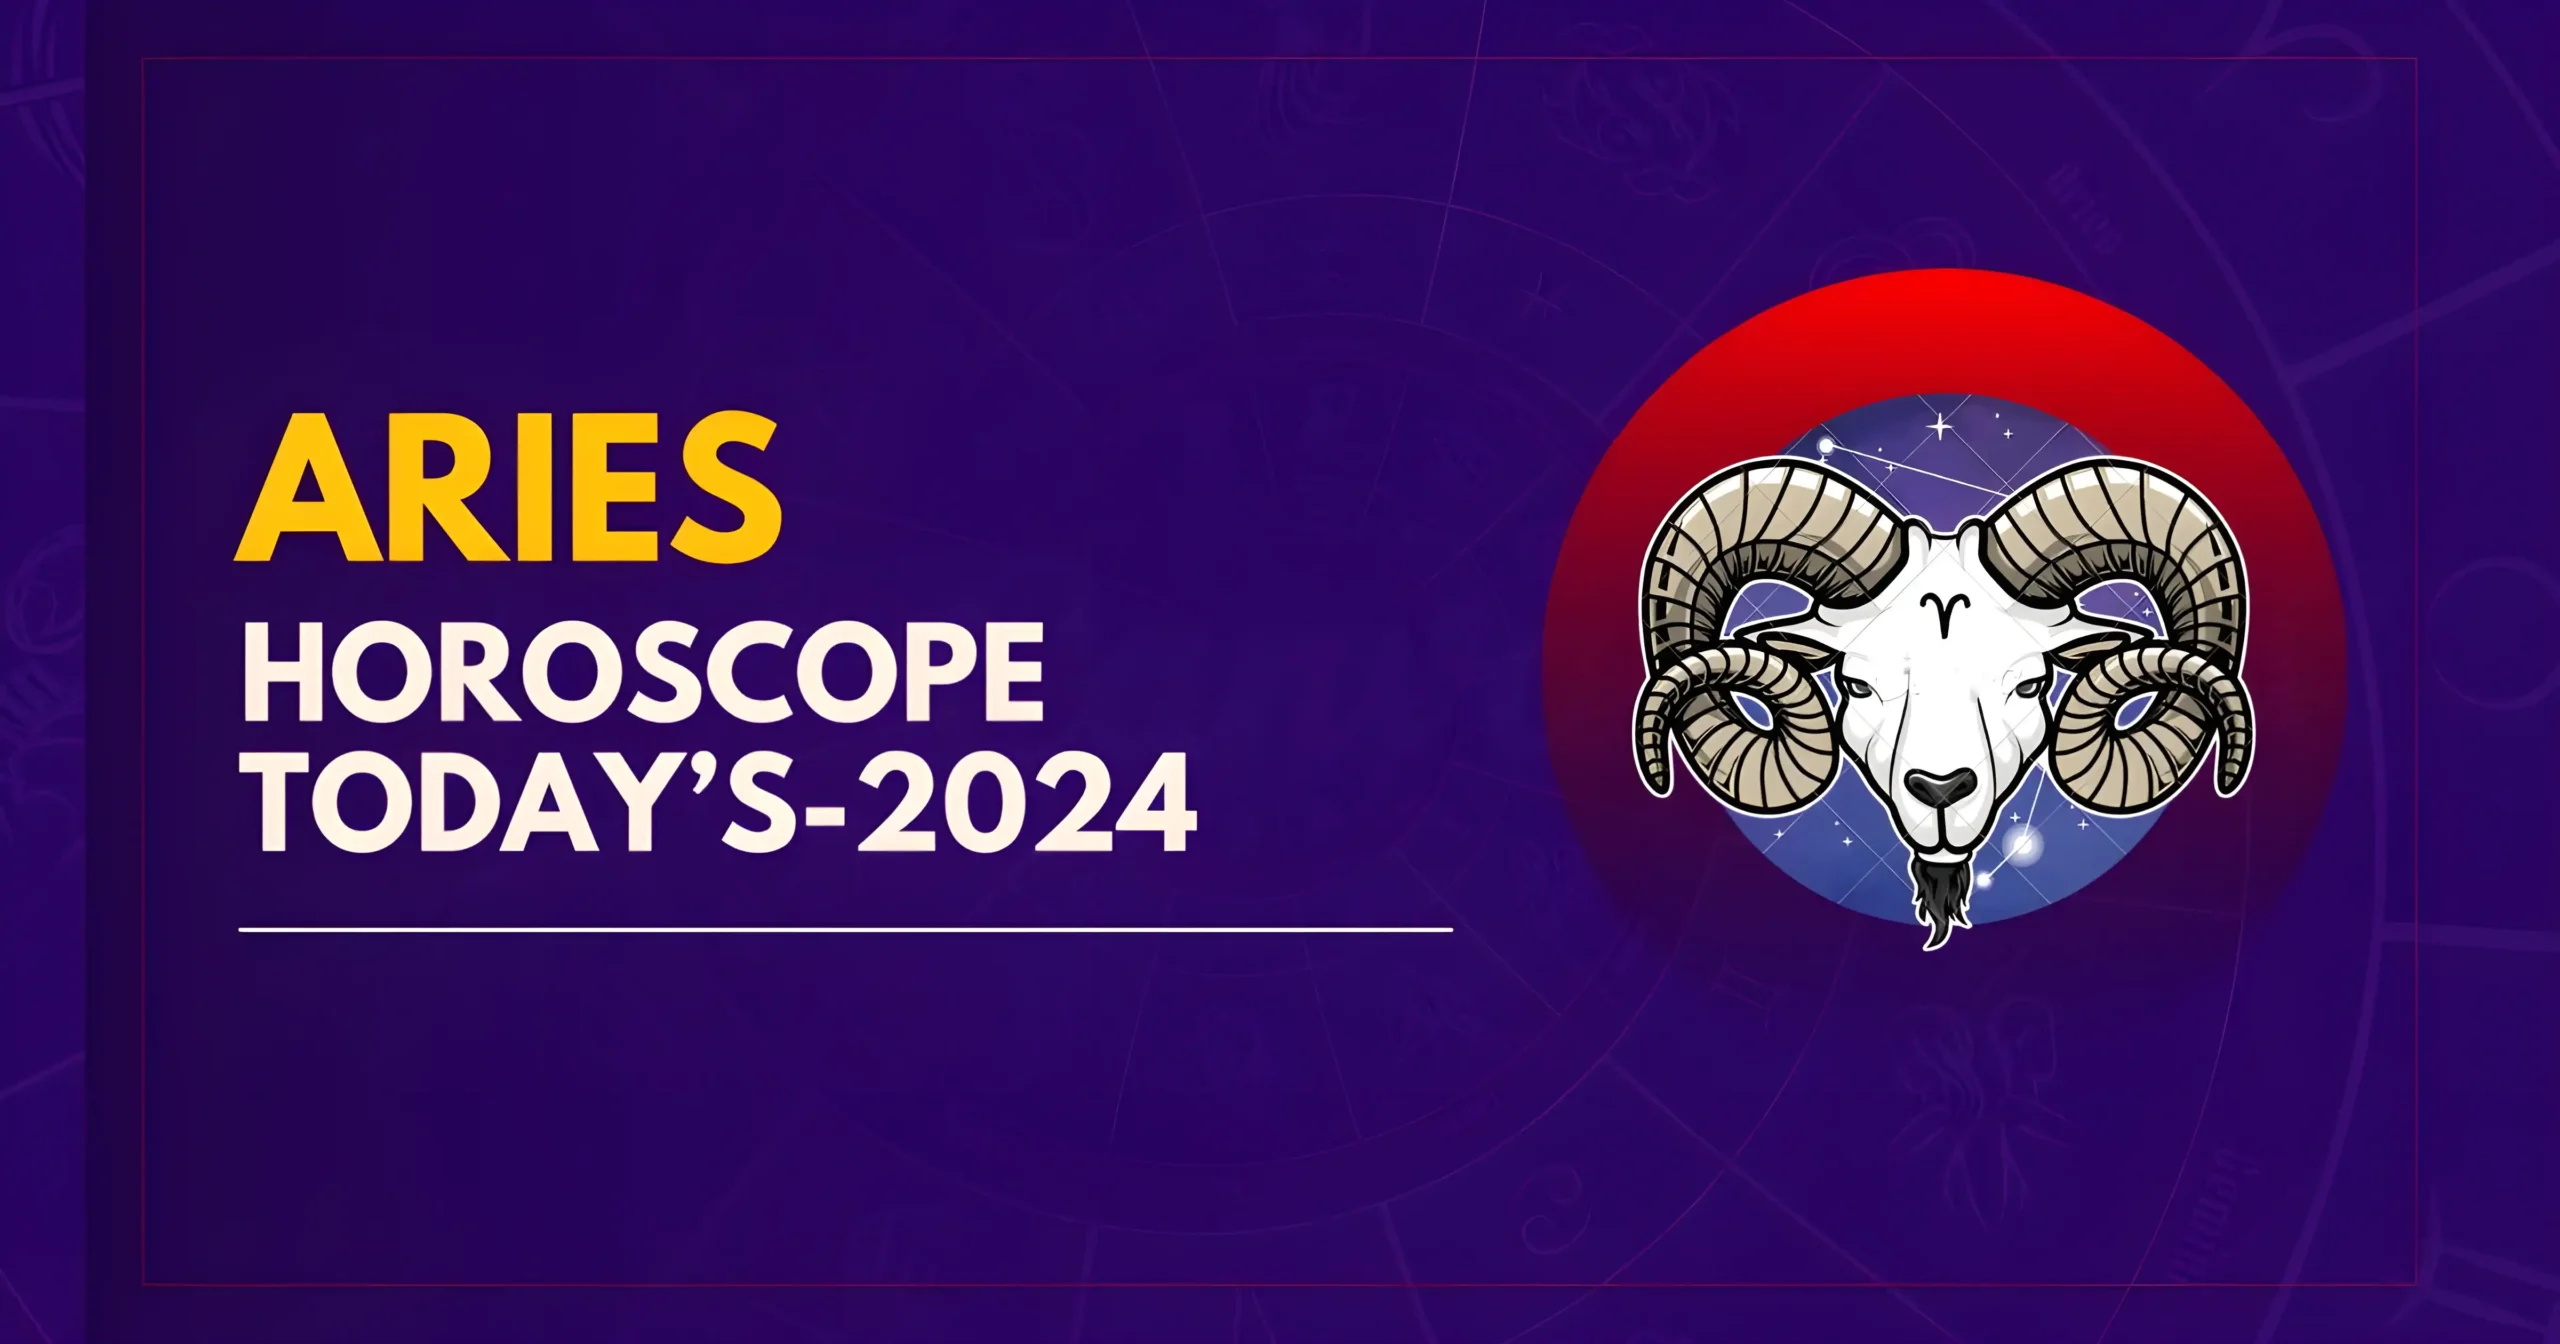 Aries Horoscope Today In Hindi 2024 Scaled.webp